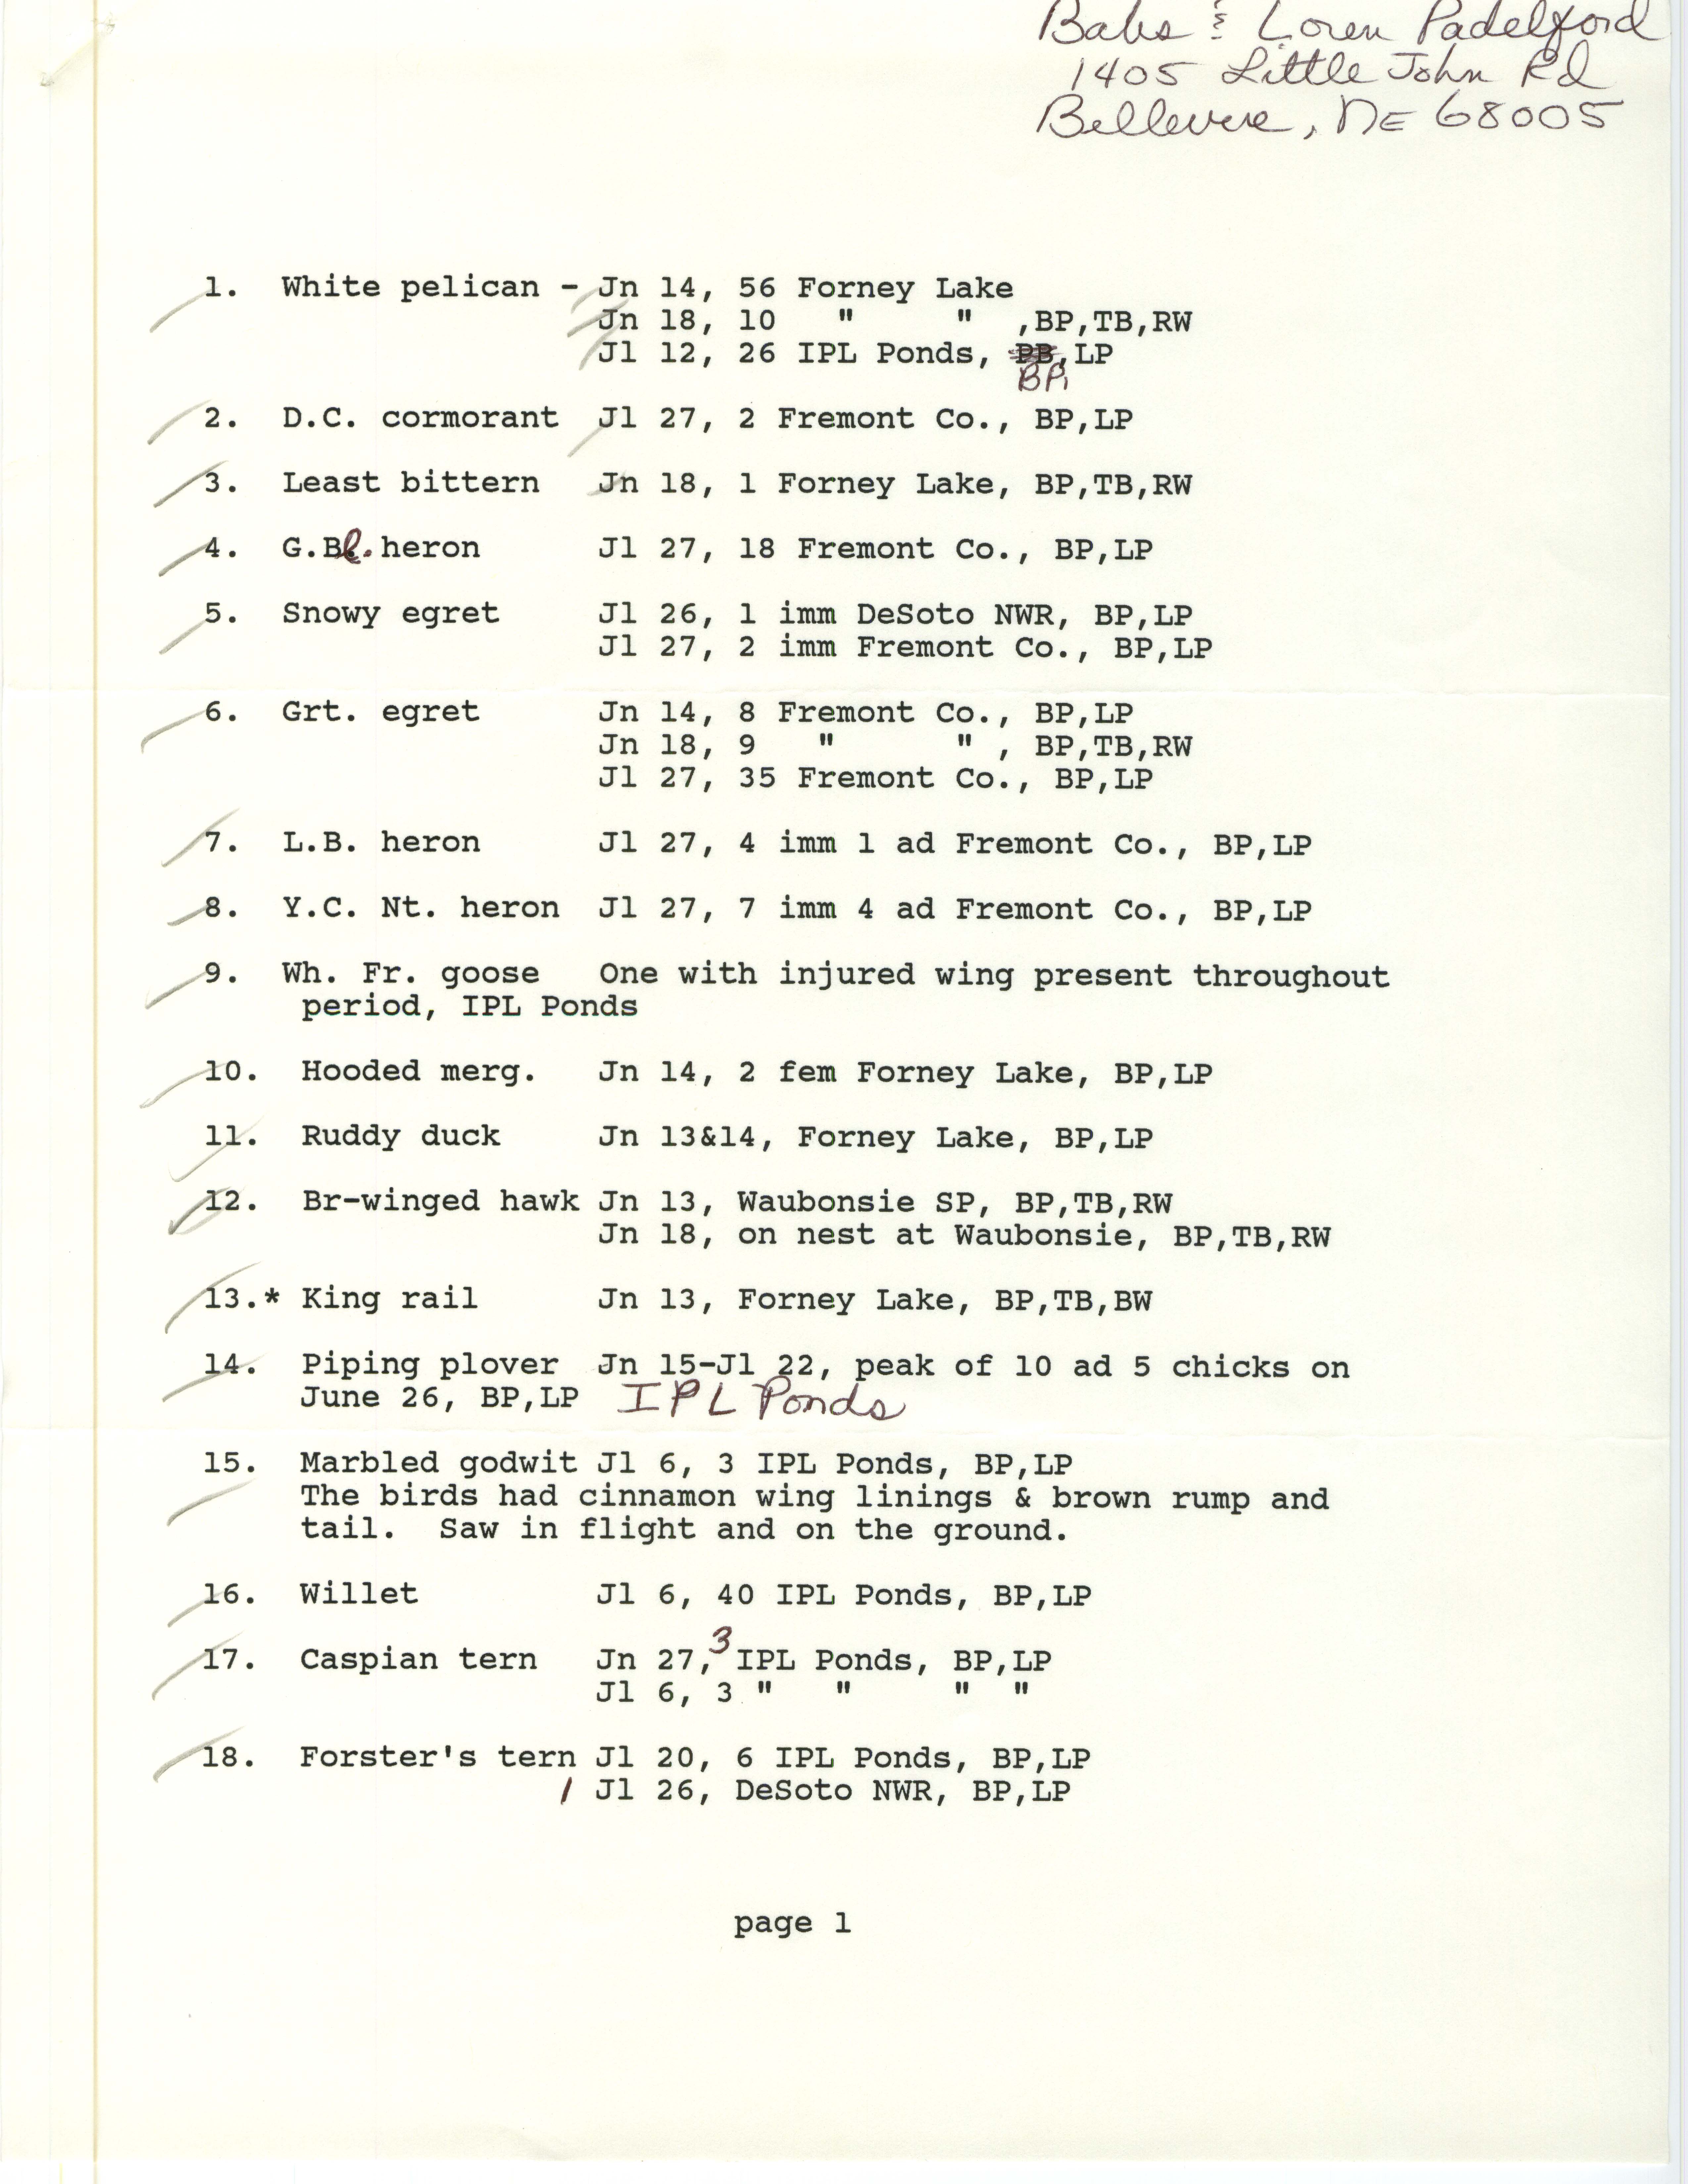 Field notes contributed by Babs Padelford and Loren Padelford, summer 1986